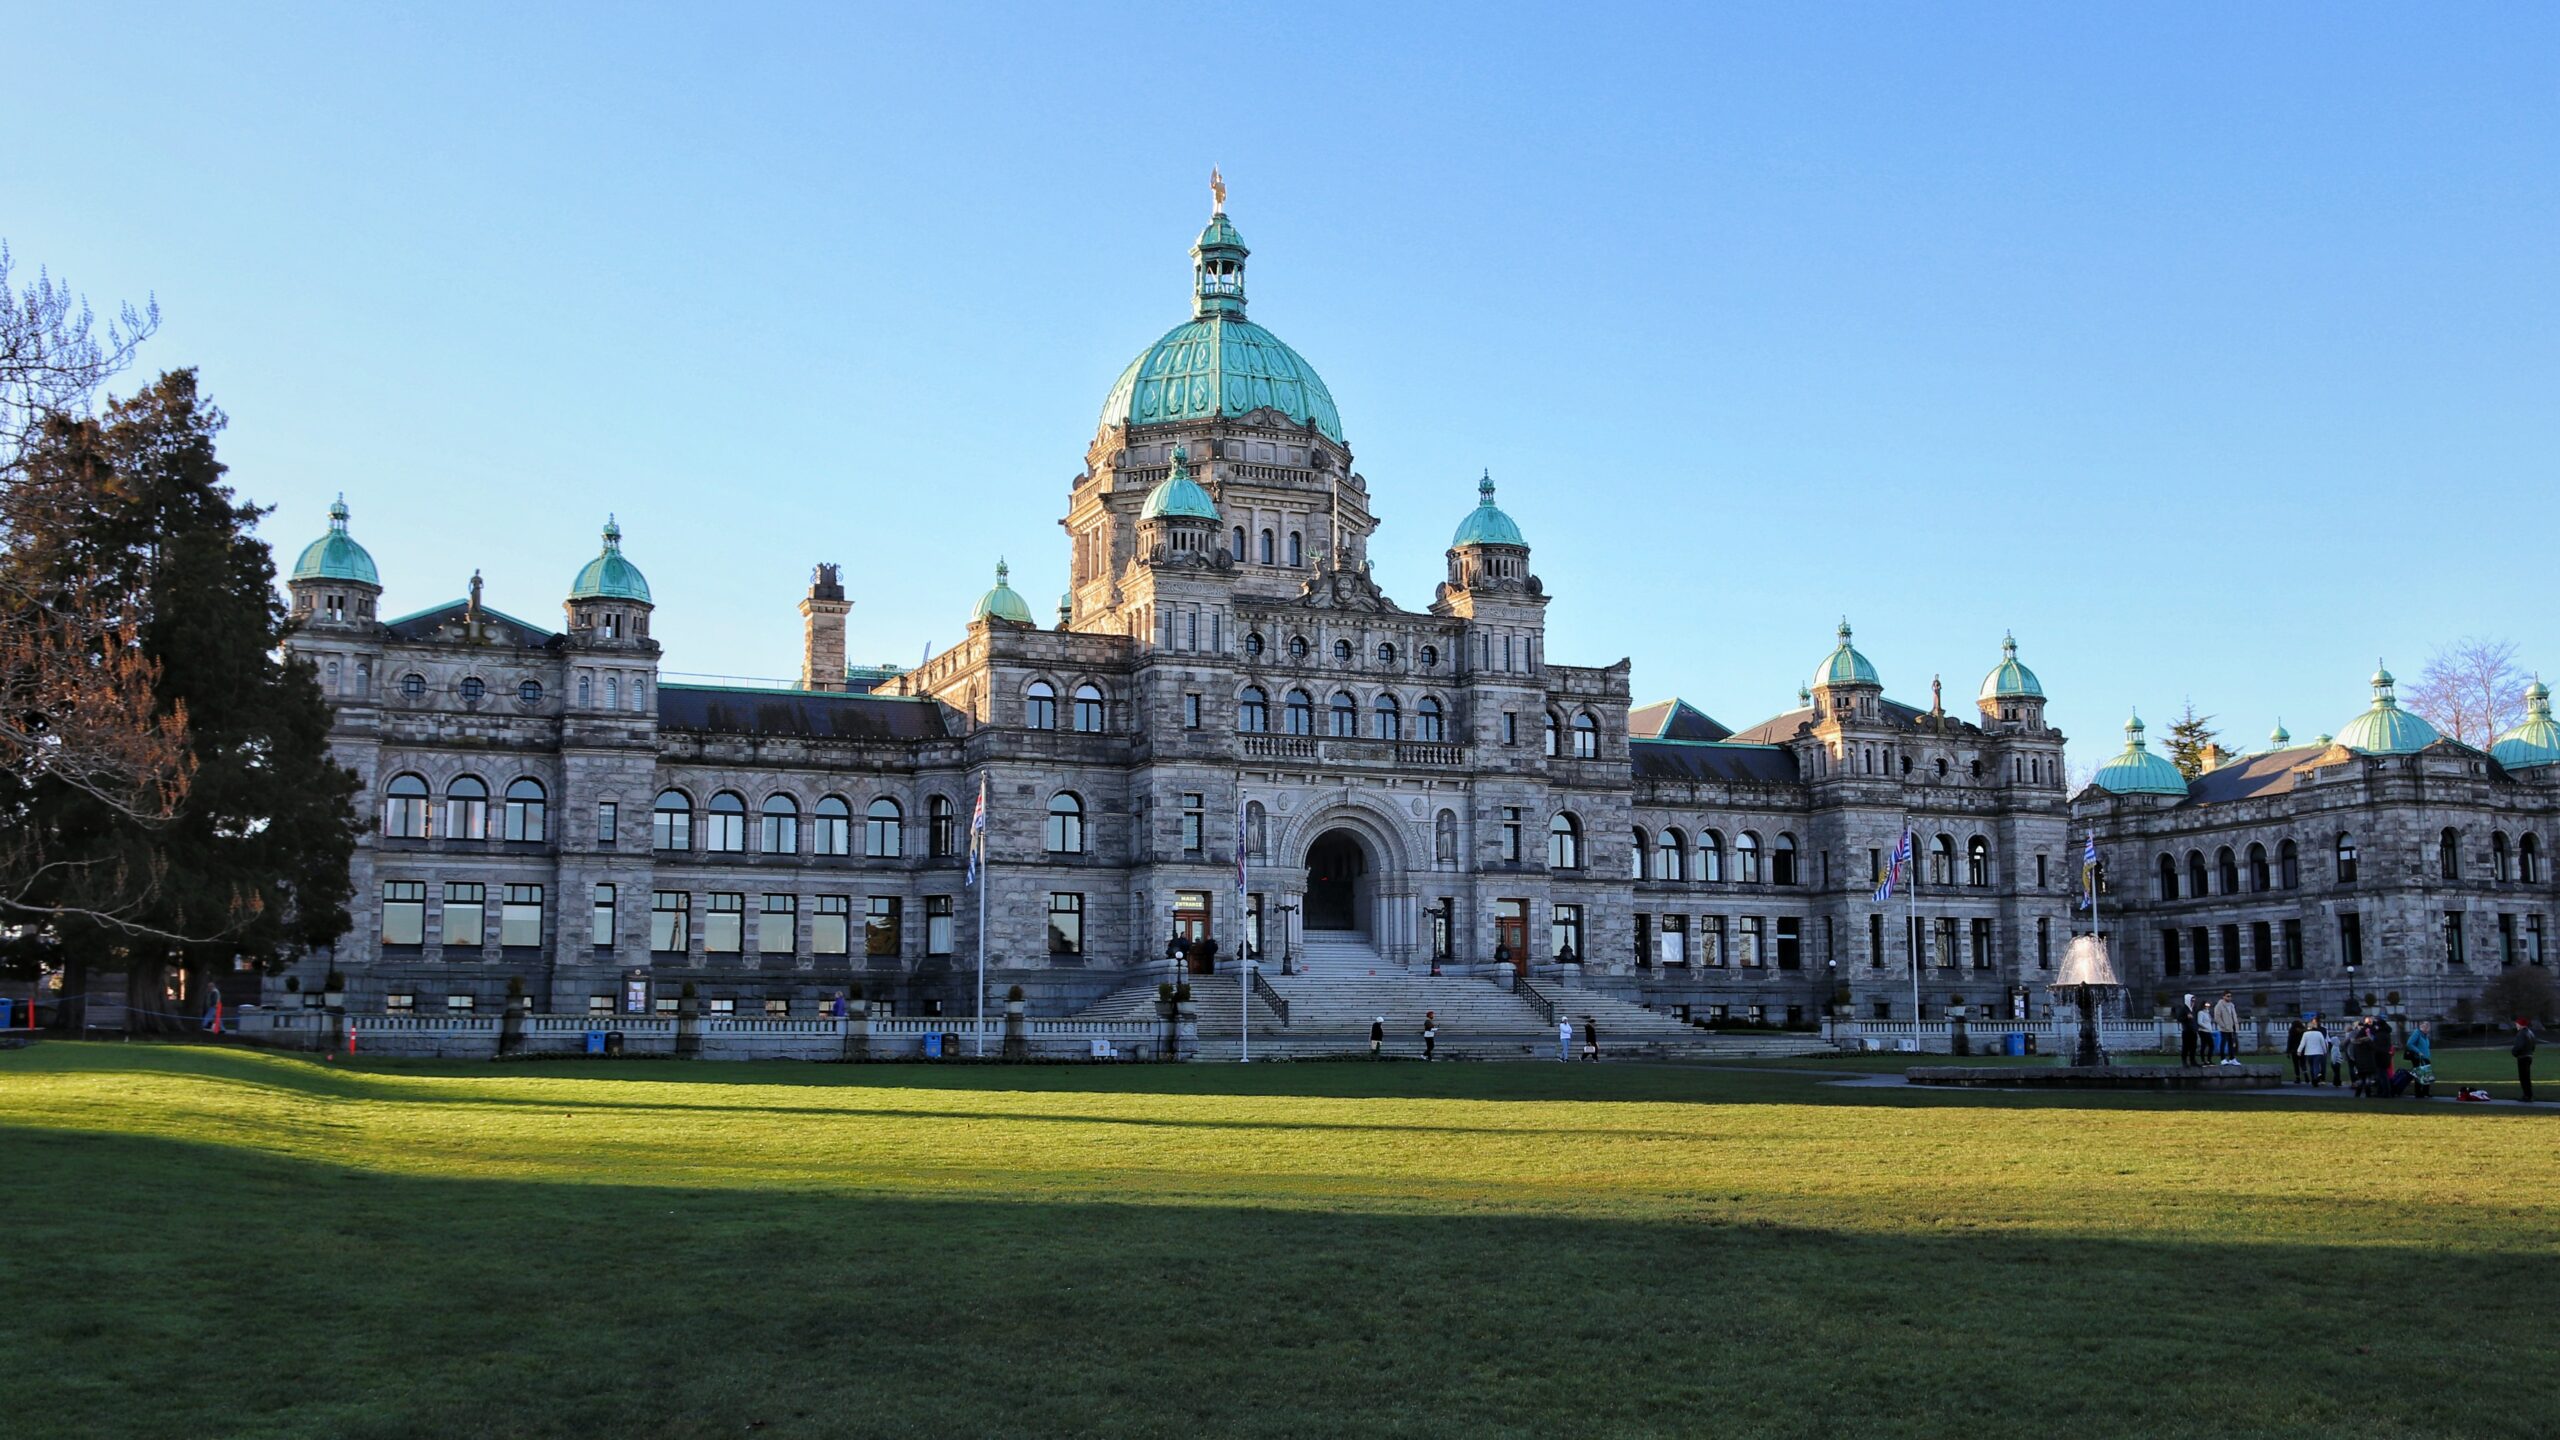 This is a photo of the BC parliament building in Victoria BC